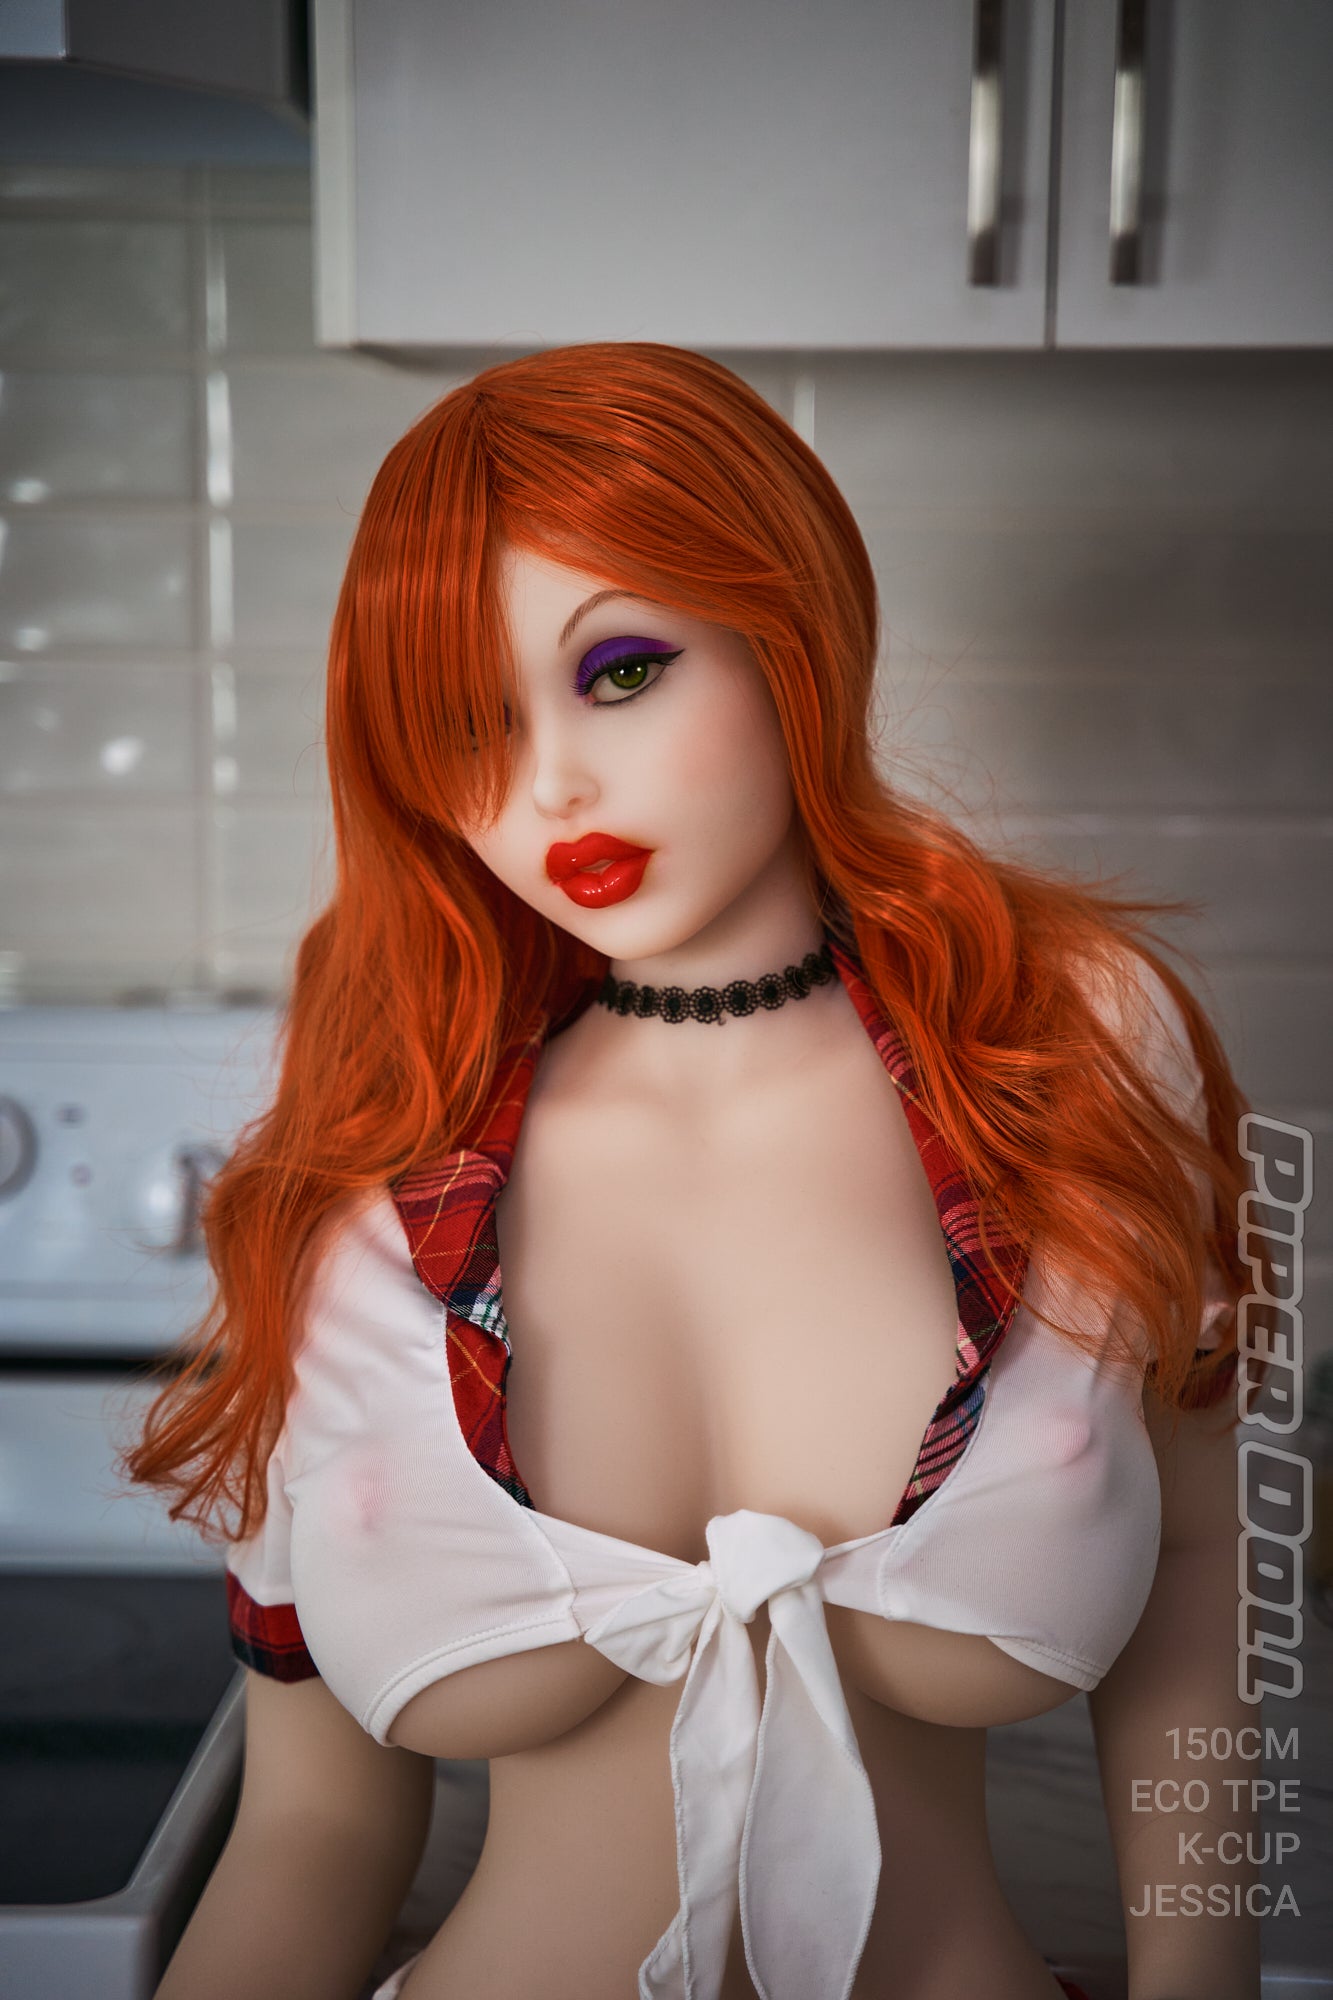 Piper Doll 150 cm K TPE - Jessica | Buy Sex Dolls at DOLLS ACTUALLY